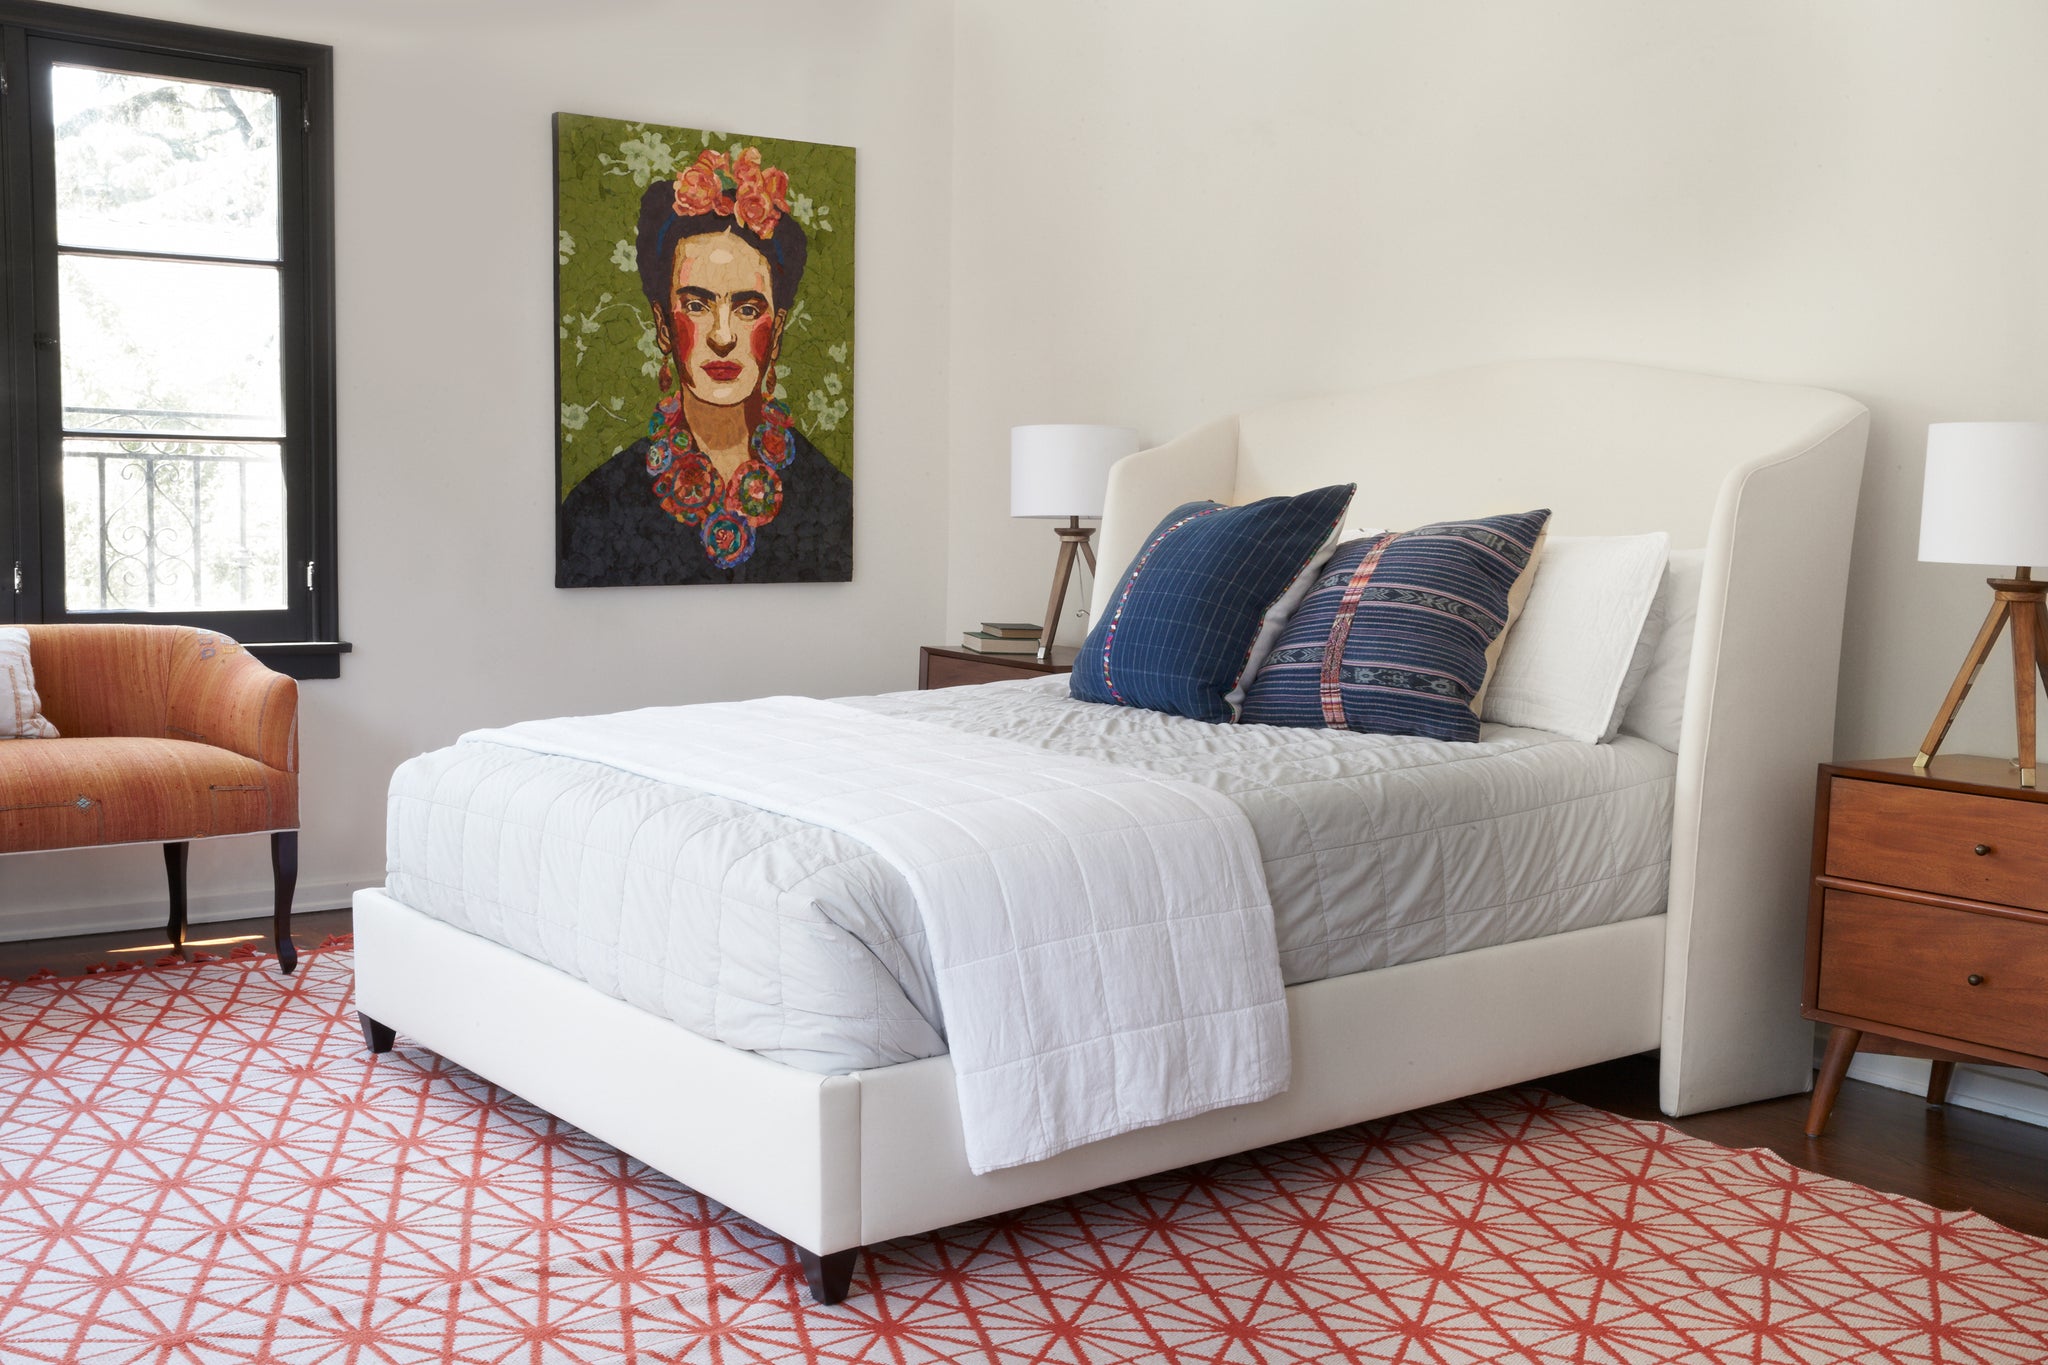  Emma bed in Otis White next to a wood side table. Underneath is a red and white patterned rug. In the background is a white wall room with a painting of a woman. Photographed in Otis White. 